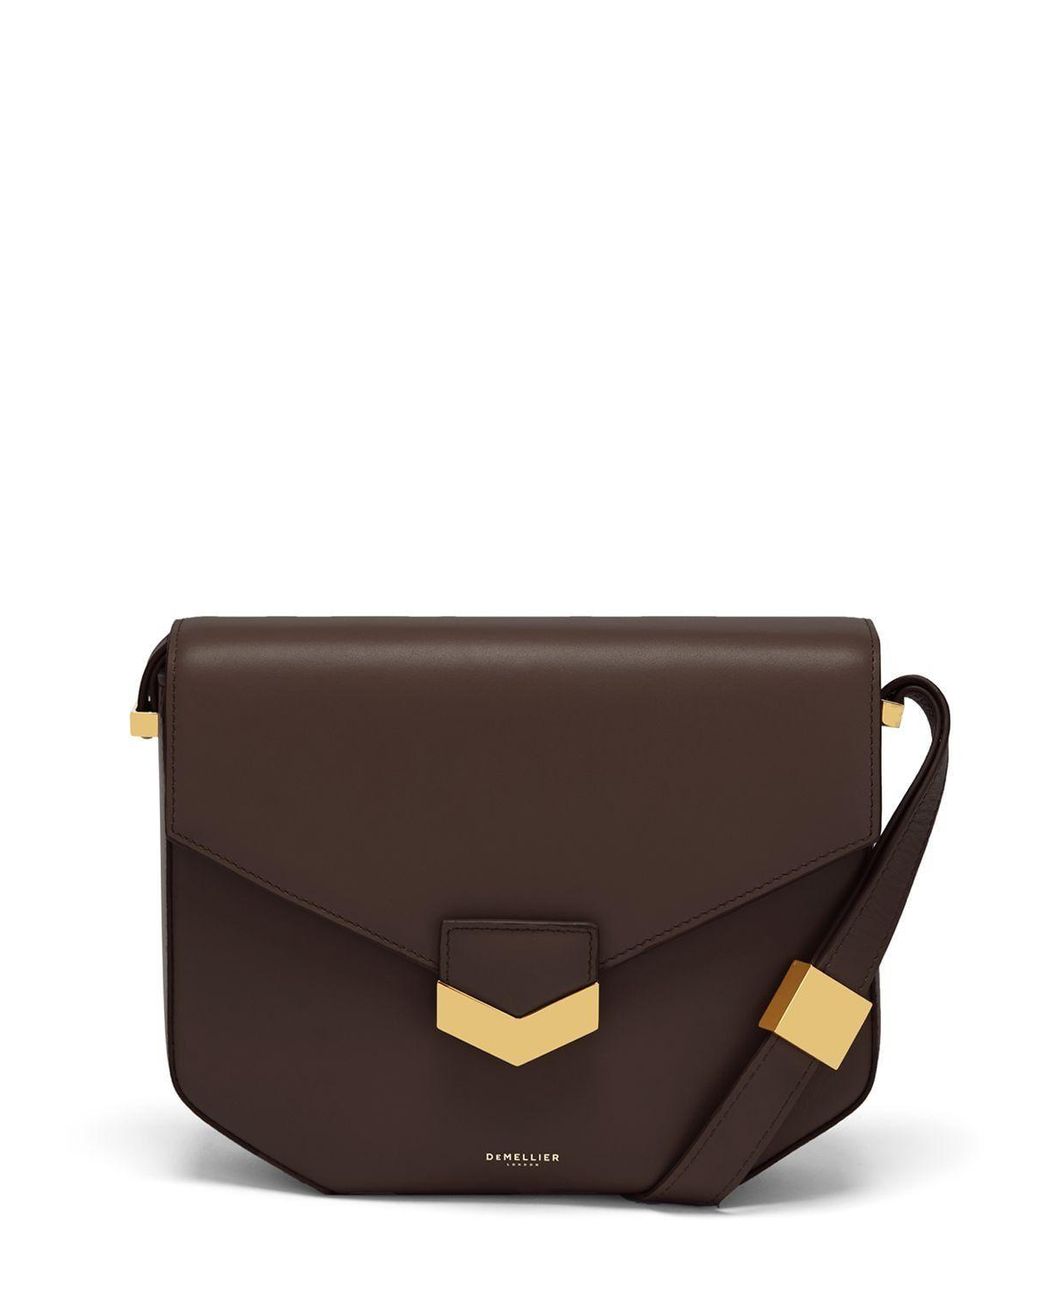 DeMellier London Smooth Leather Shoulder Bag in Brown | Lyst